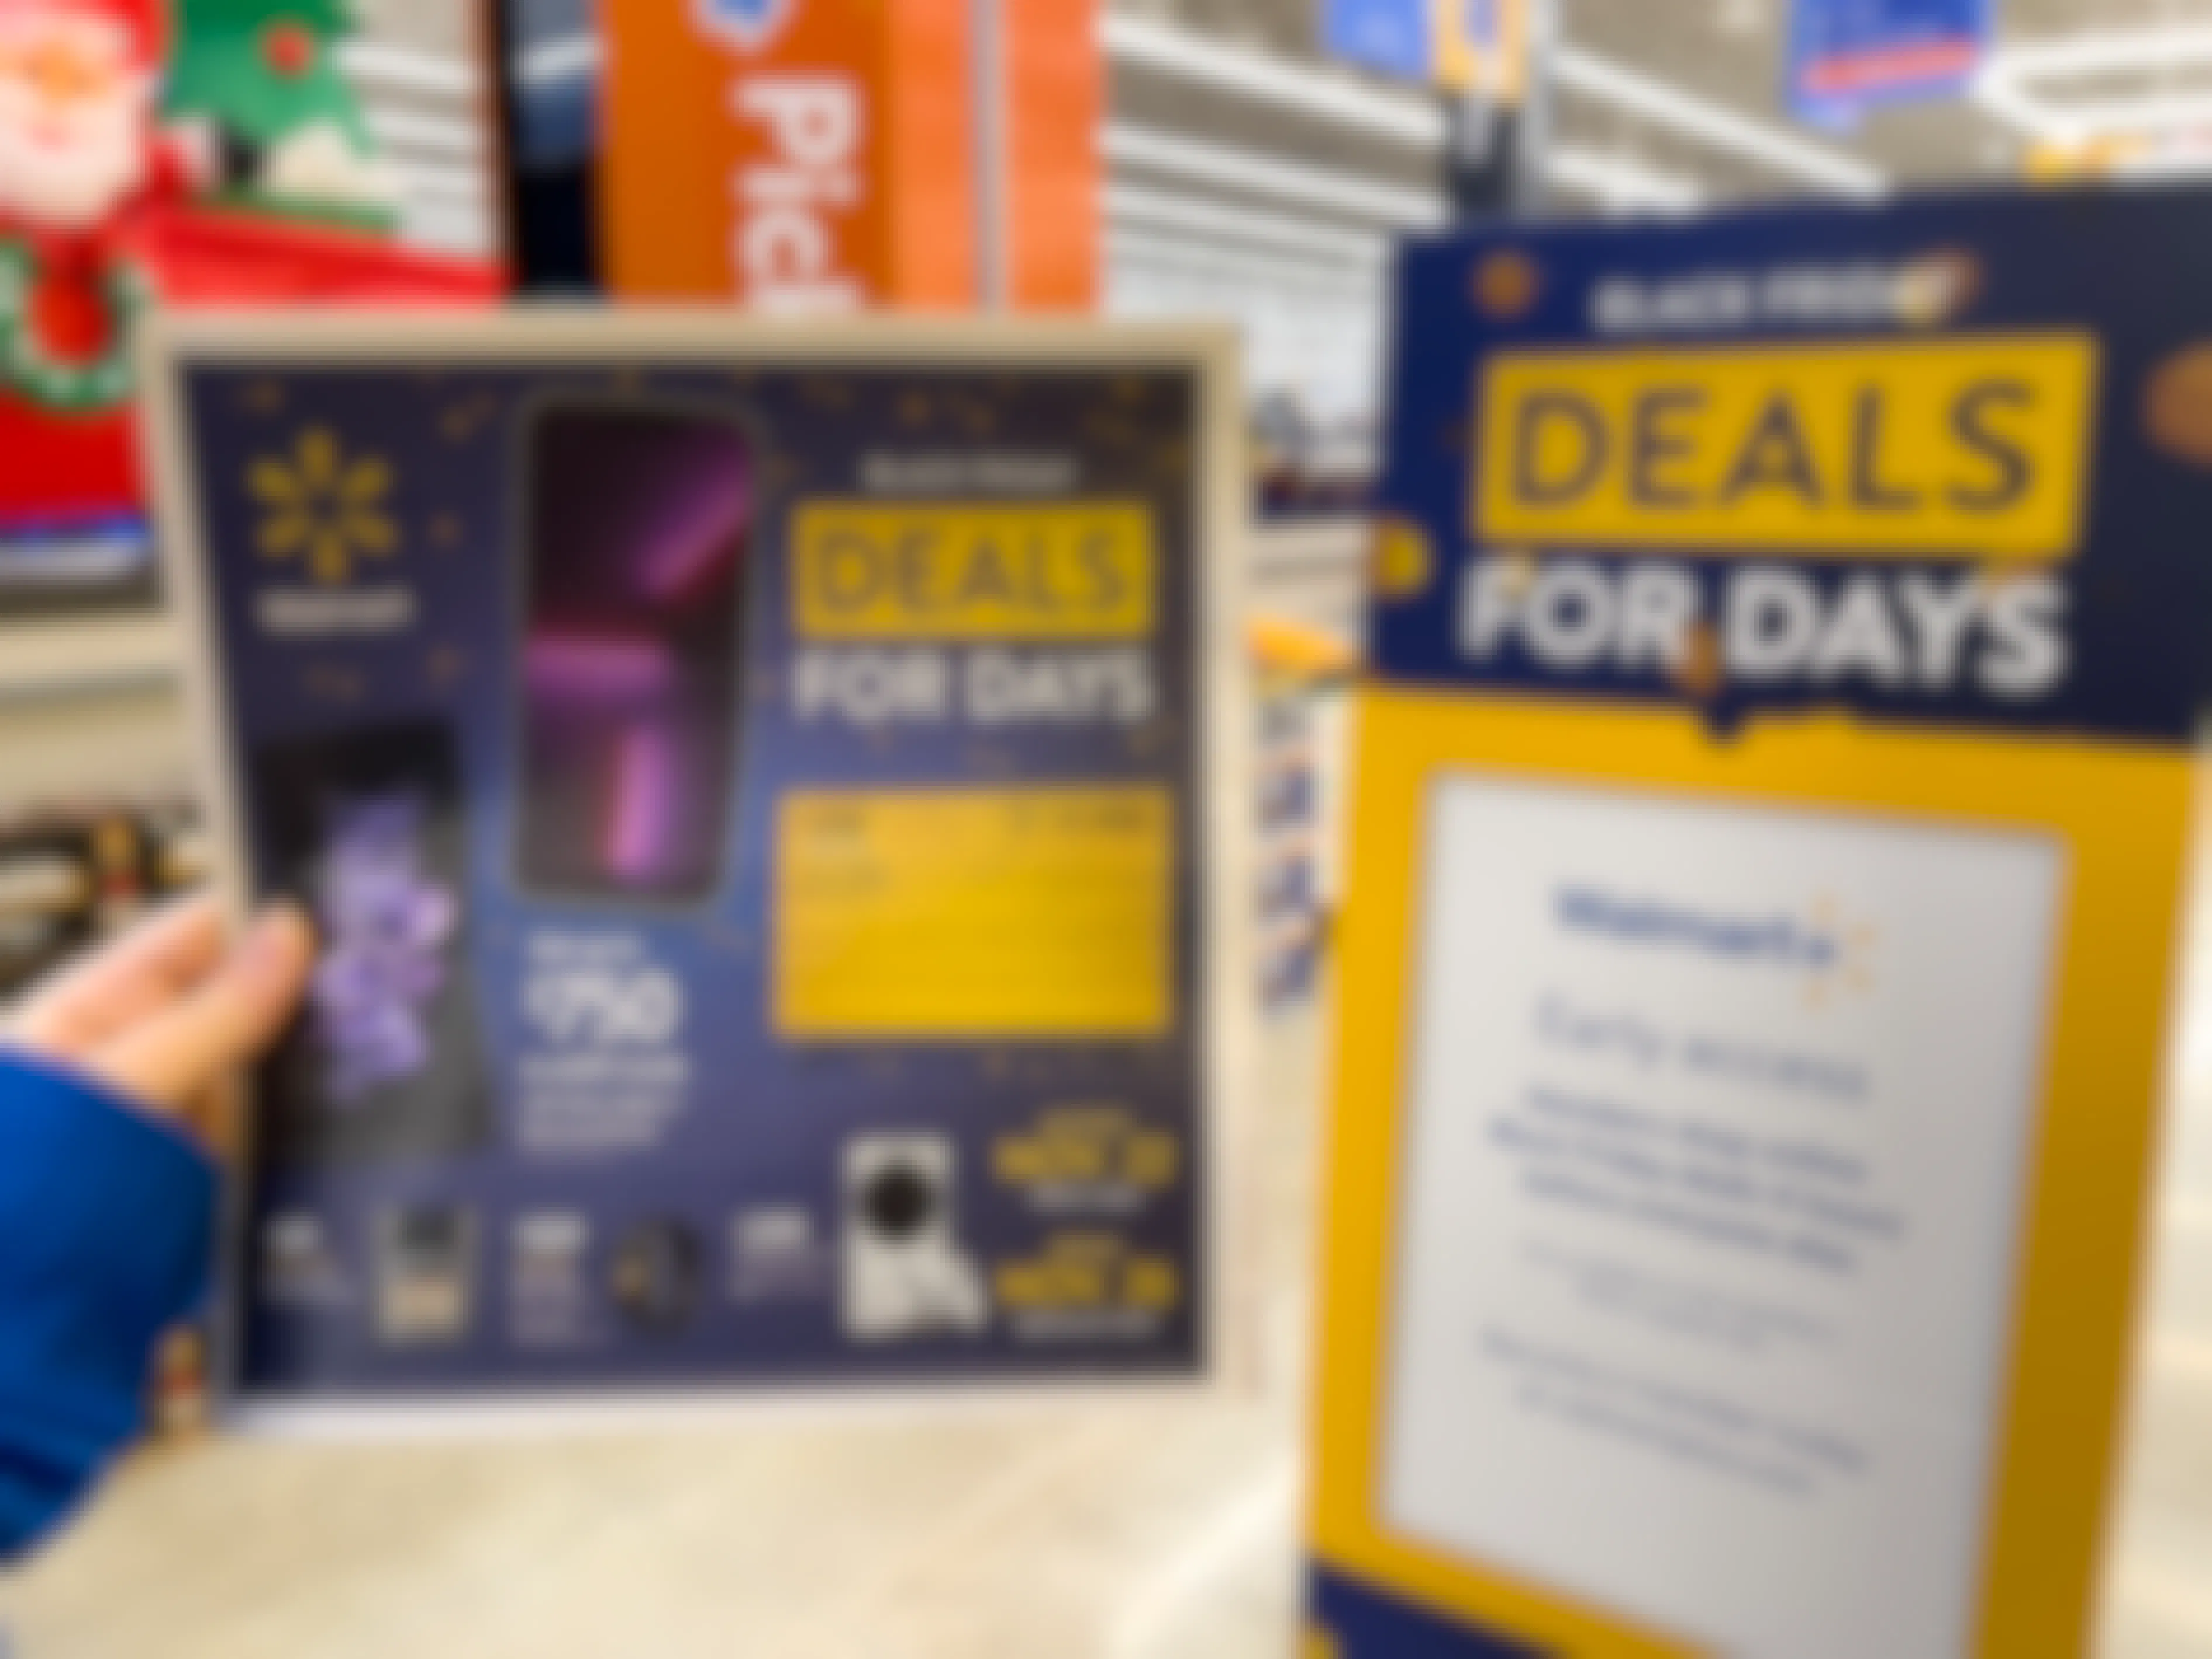 A person's hand holding up the Walmart Black Friday paper ad next to a Deals for Days sign inside Walmart.